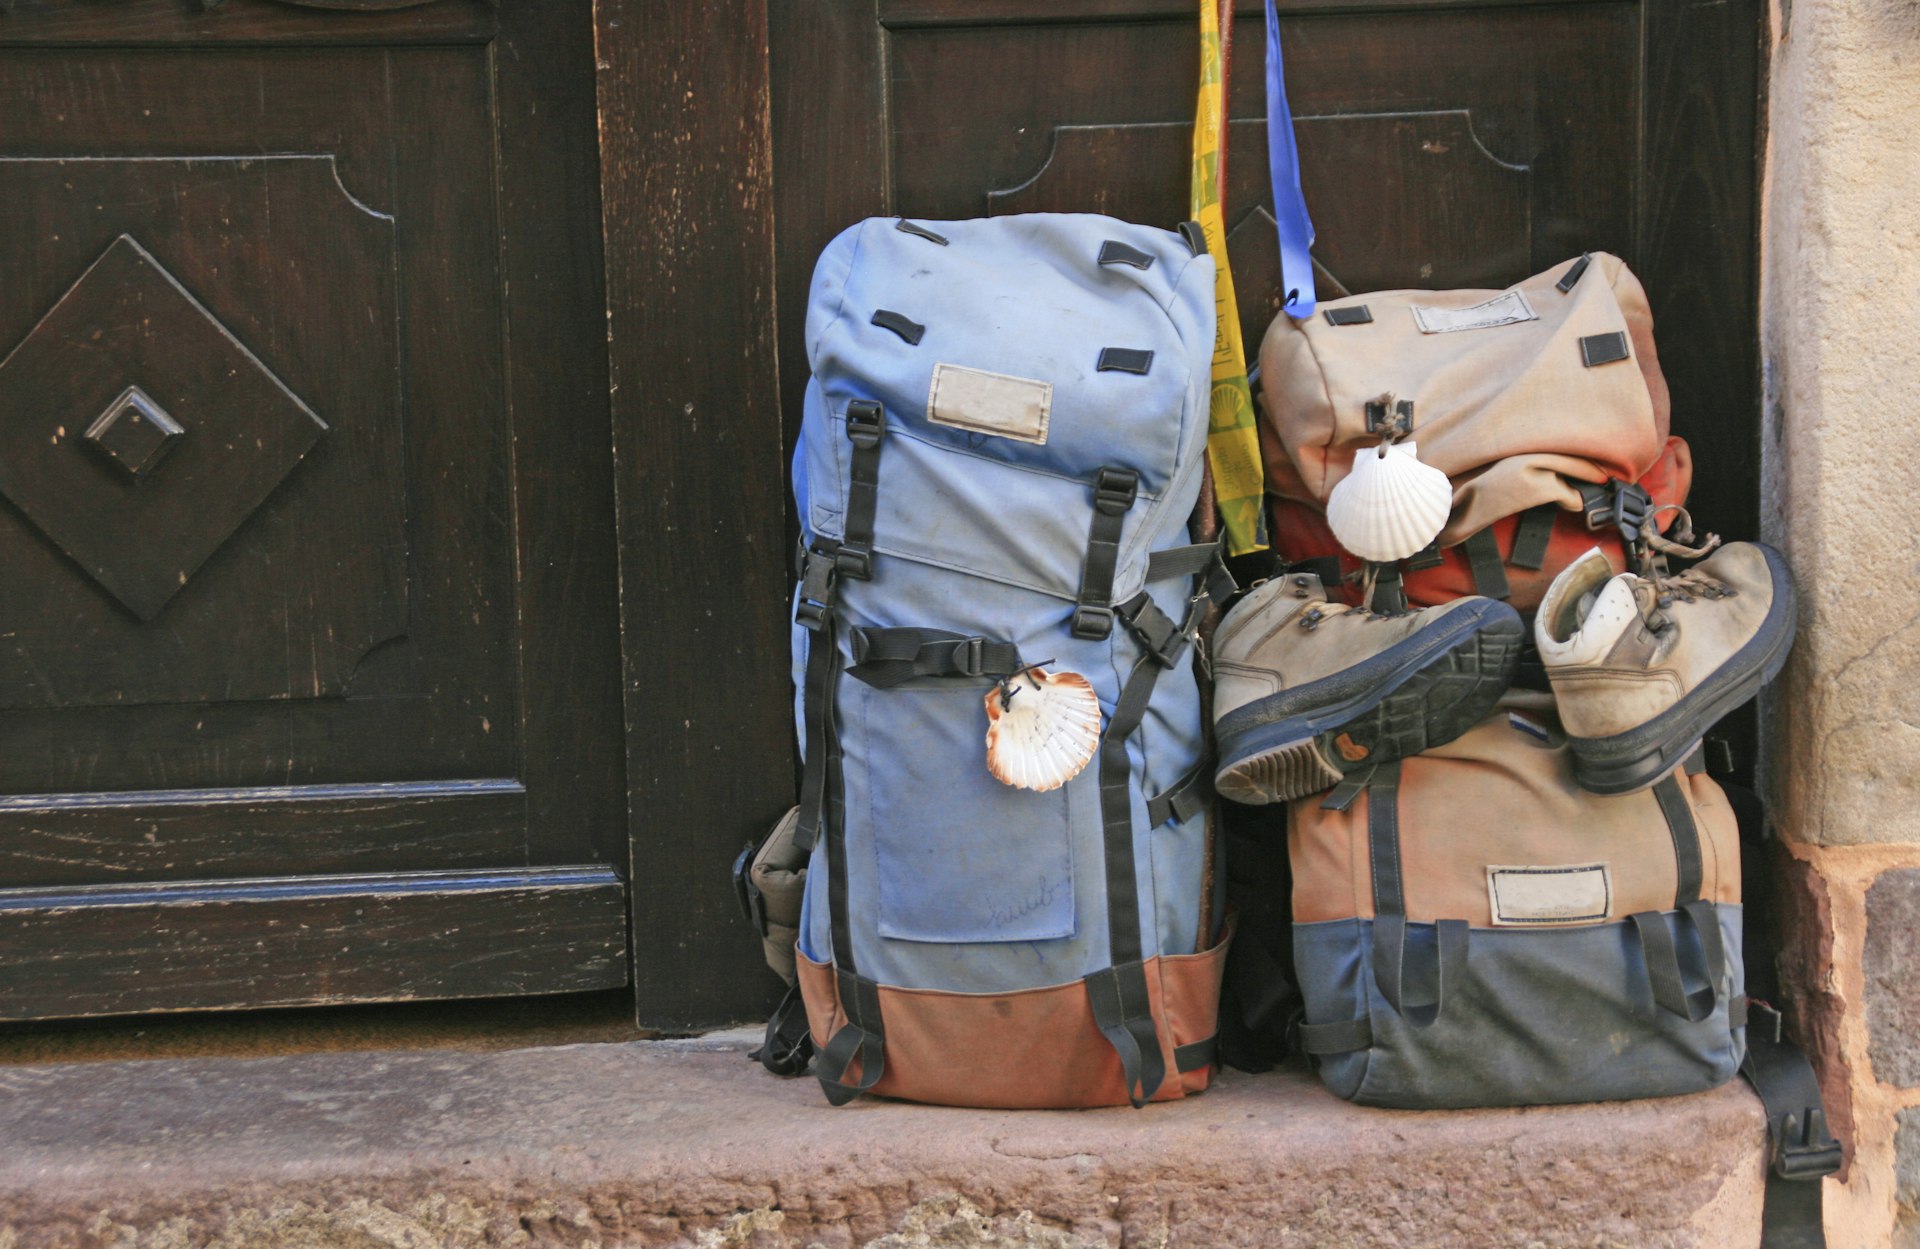 Two backpacks leaning against each other in a doorway